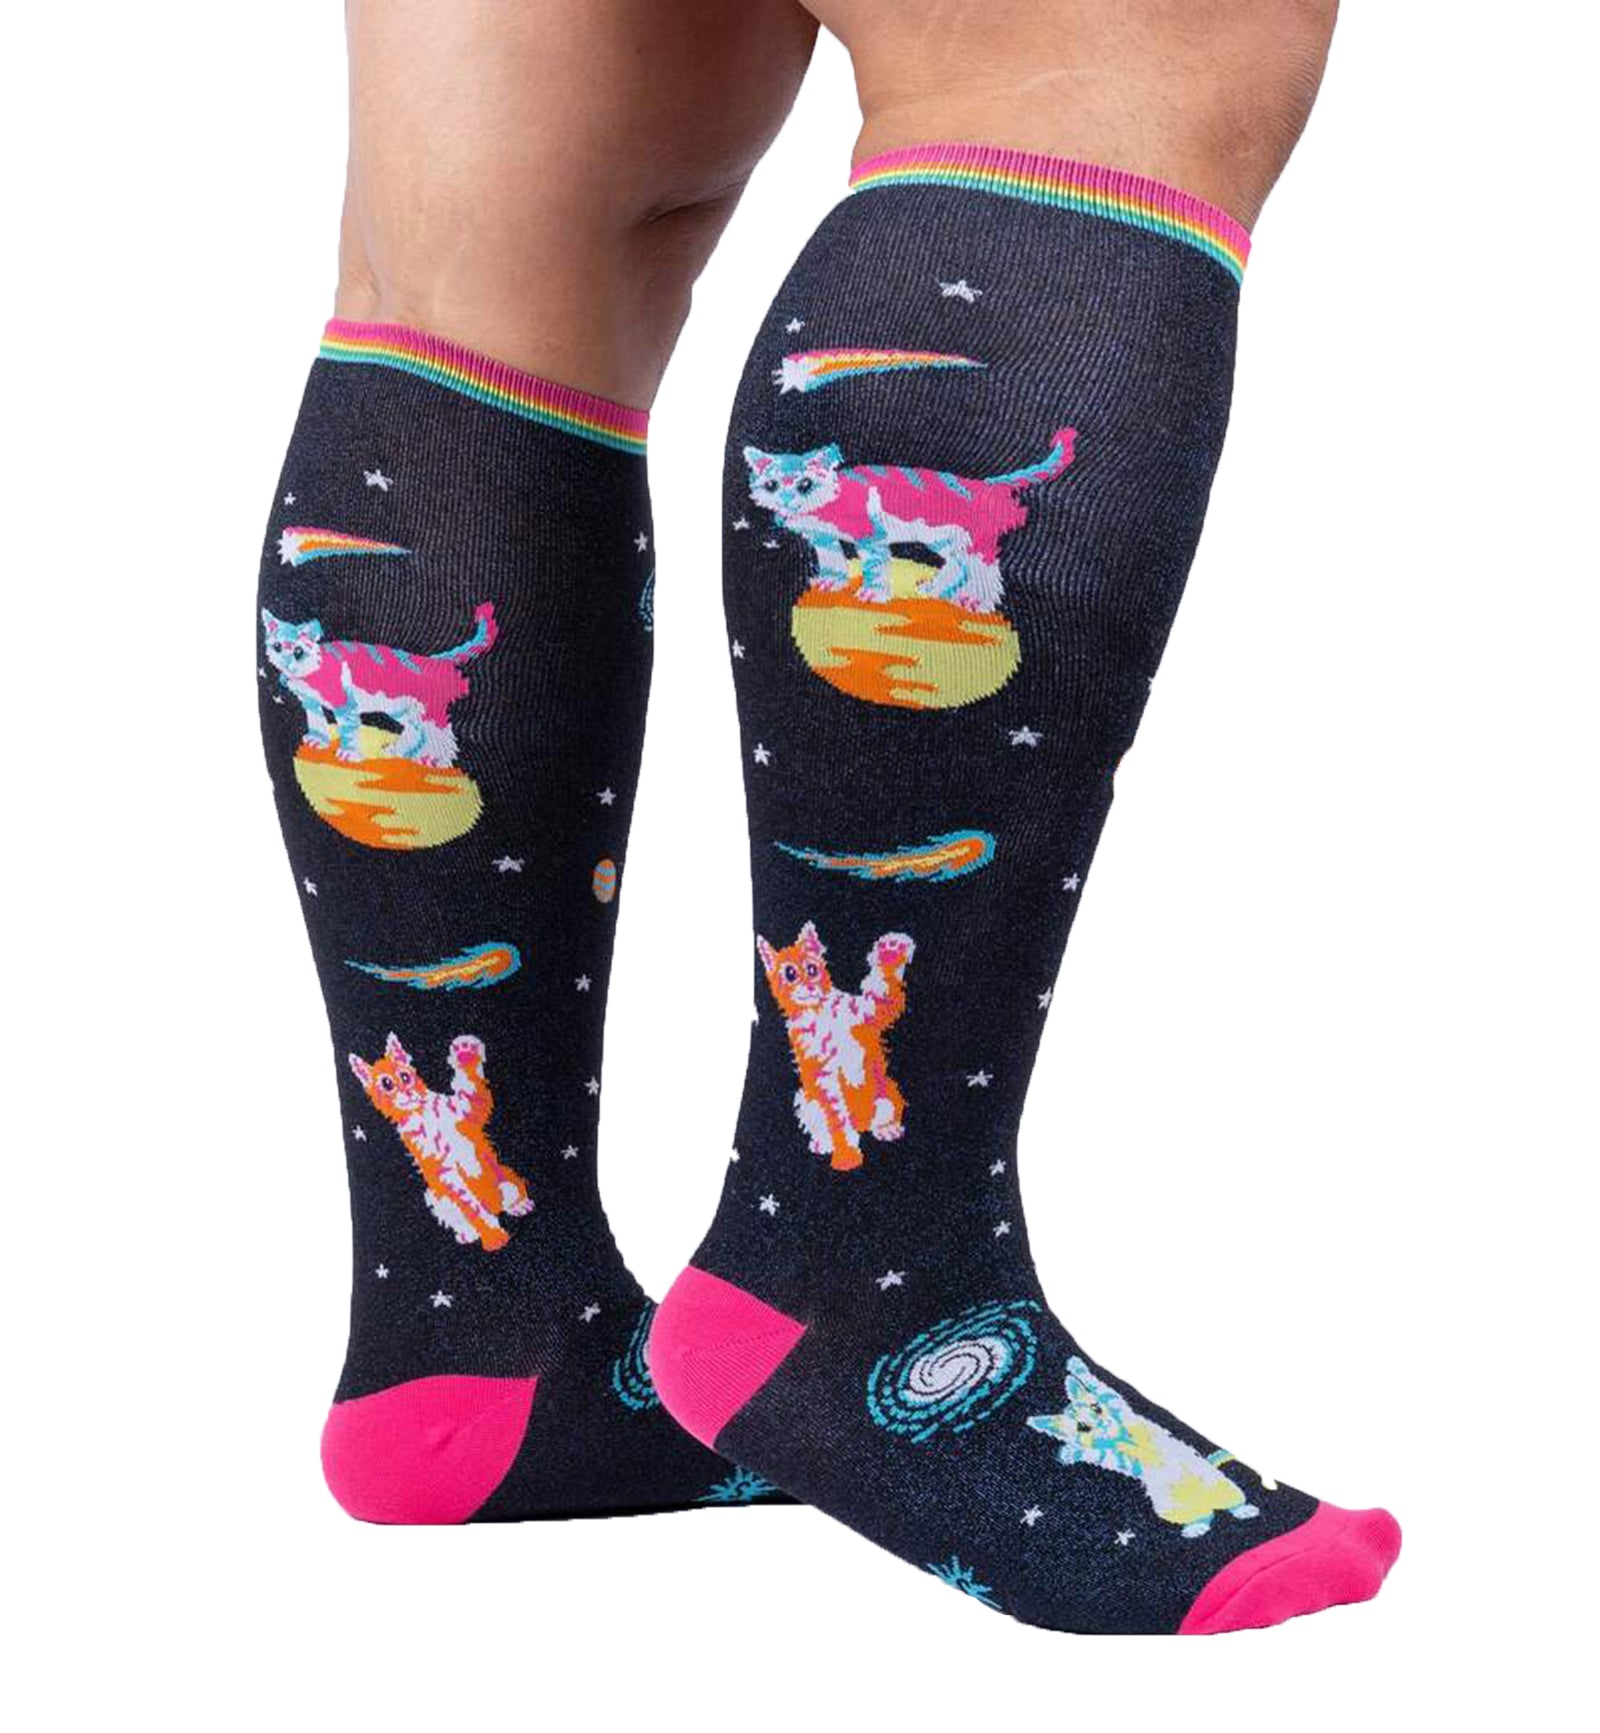 SOCK it to me Unisex Stretch-It Knee High Socks (S0156),Space Cats - Space Cats,One Size